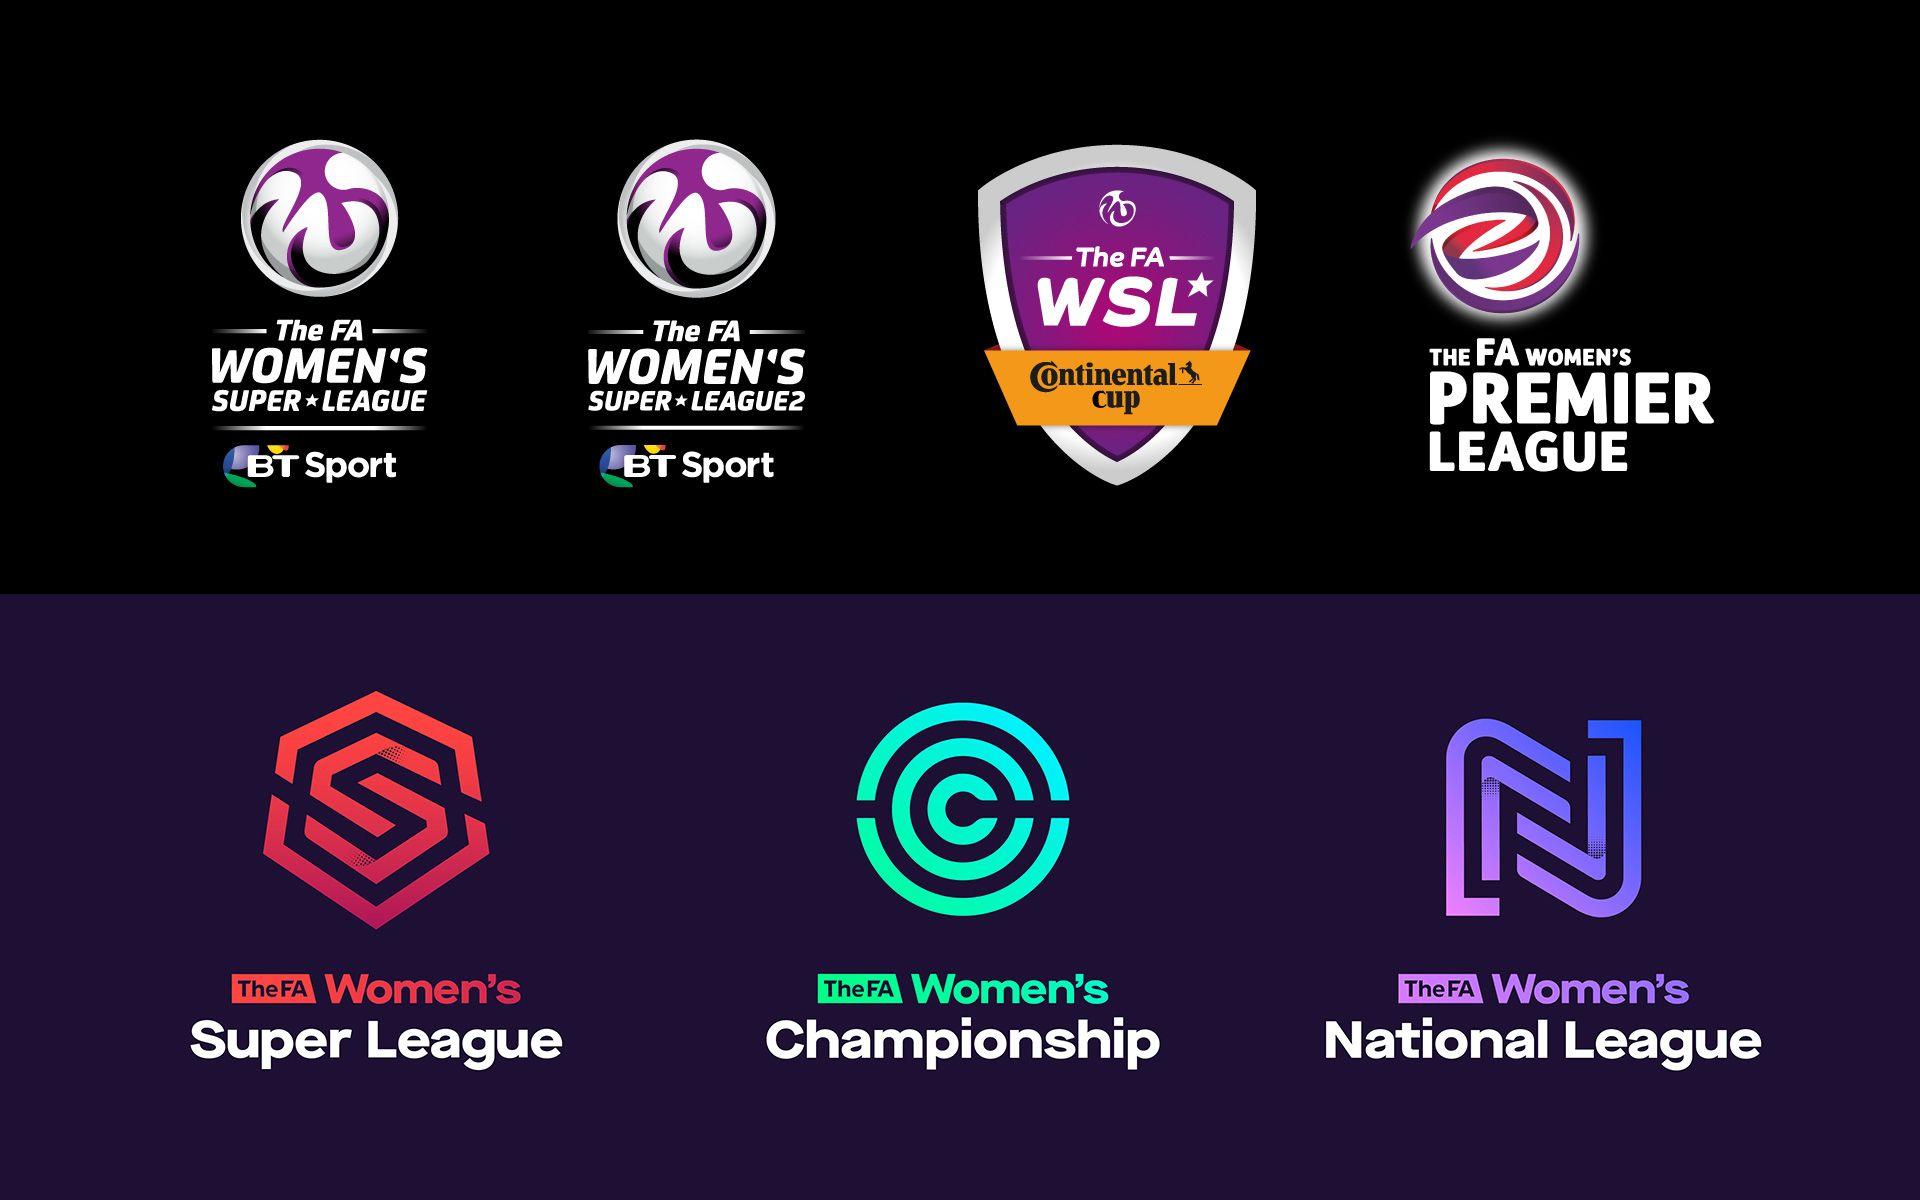 League Logo - Brand New: New Logos and Identity for FA Women's Leagues by Nomad